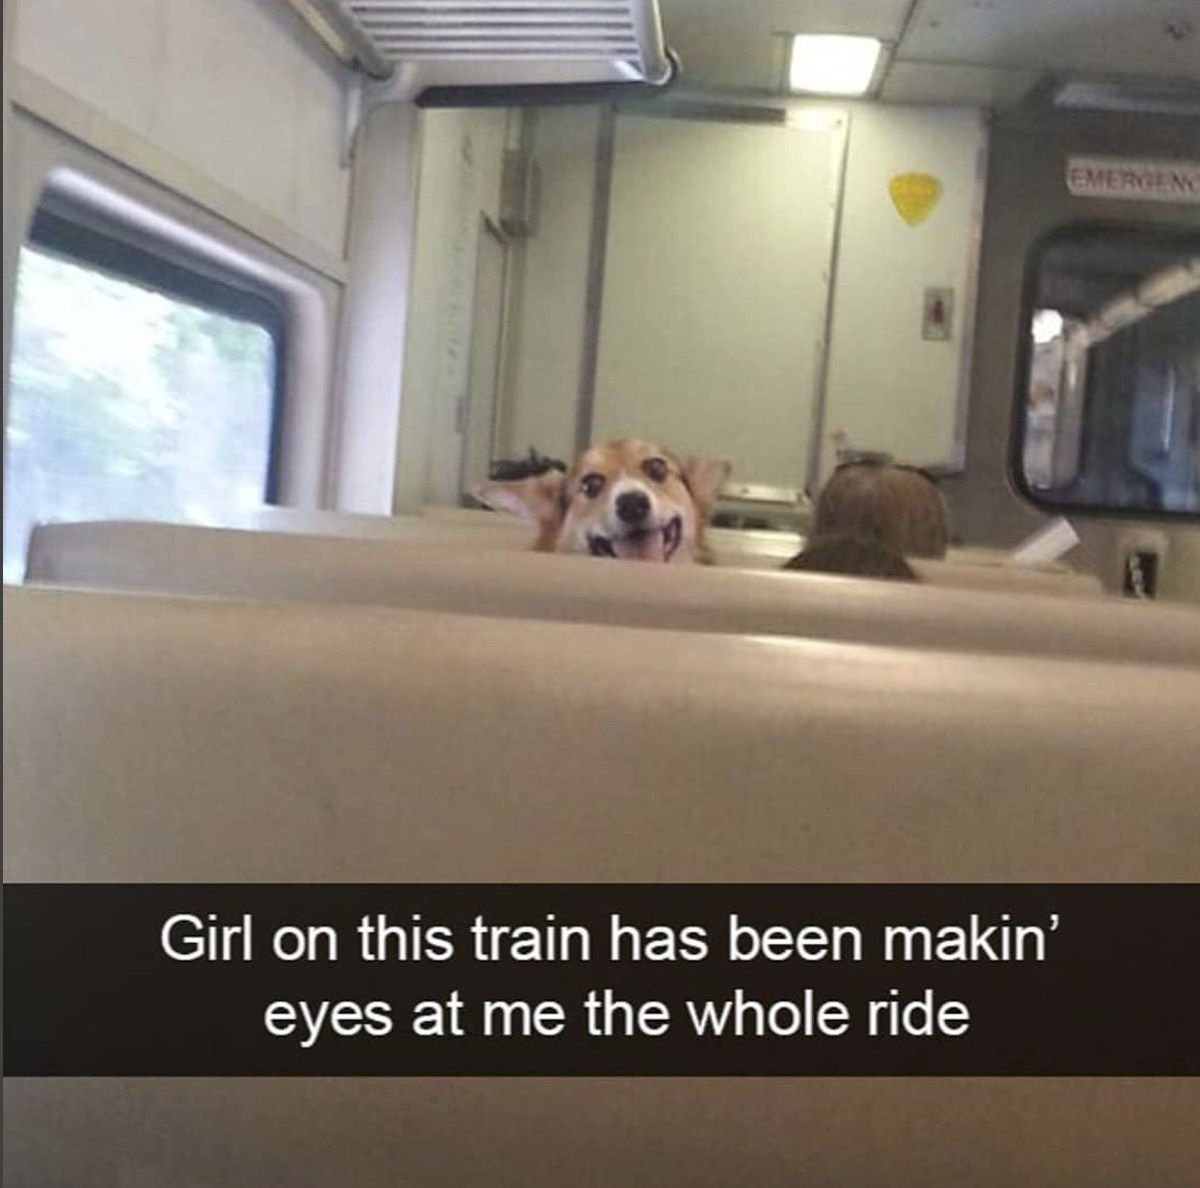 texas accent meme - Girl on this train has been makin' eyes at me the whole ride